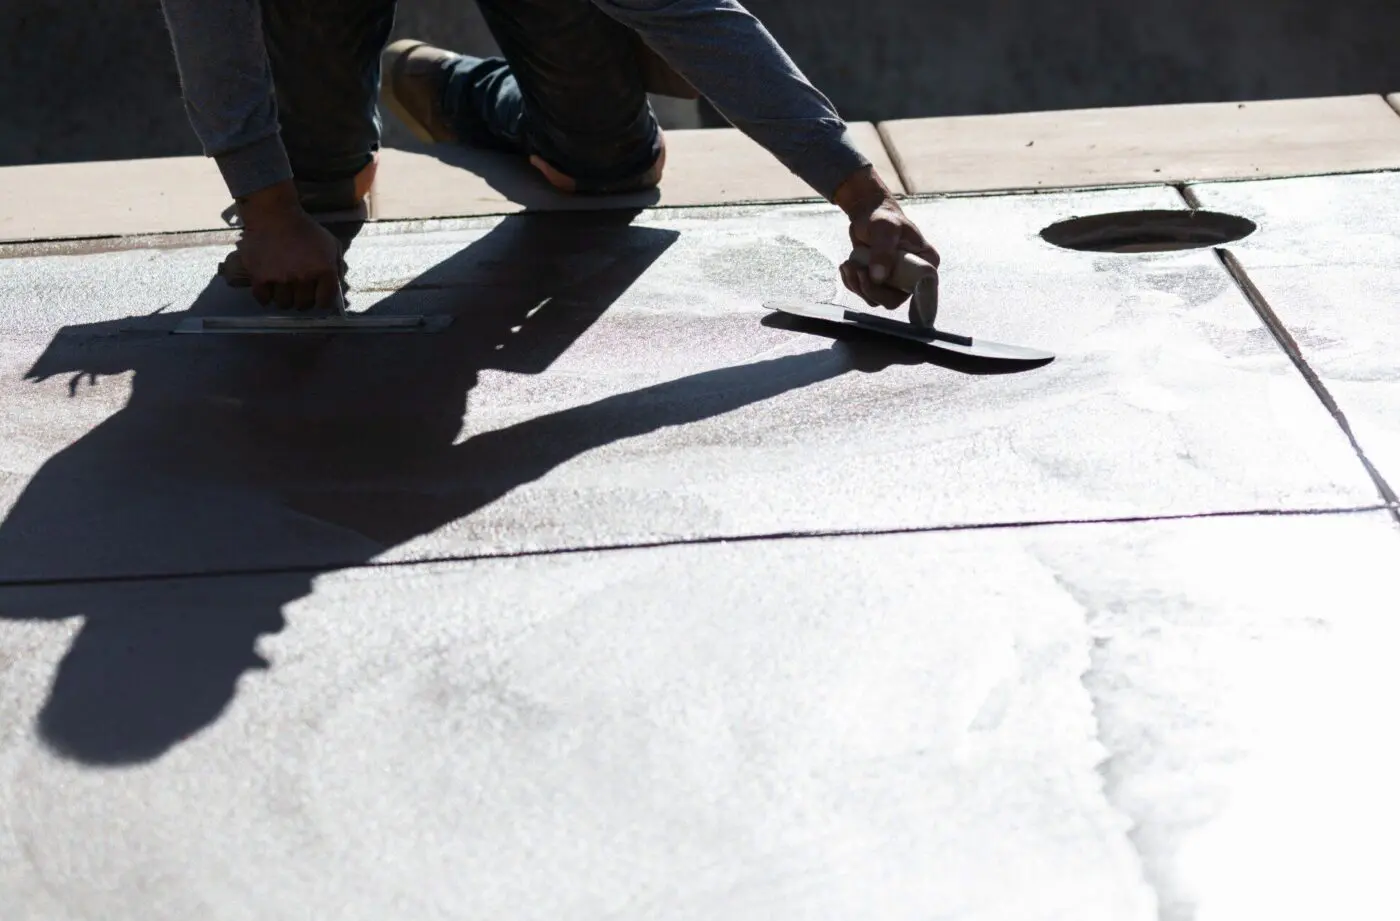 A person is smoothing wet concrete with a trowel on a sunny day in Davie, FL. Their shadow is visible on the surface, highlighting their precise movements. Wearing a long-sleeved shirt, their hands grip the trowel handles expertly, showcasing Lauderdale Concrete Contractors' decorative concrete services.